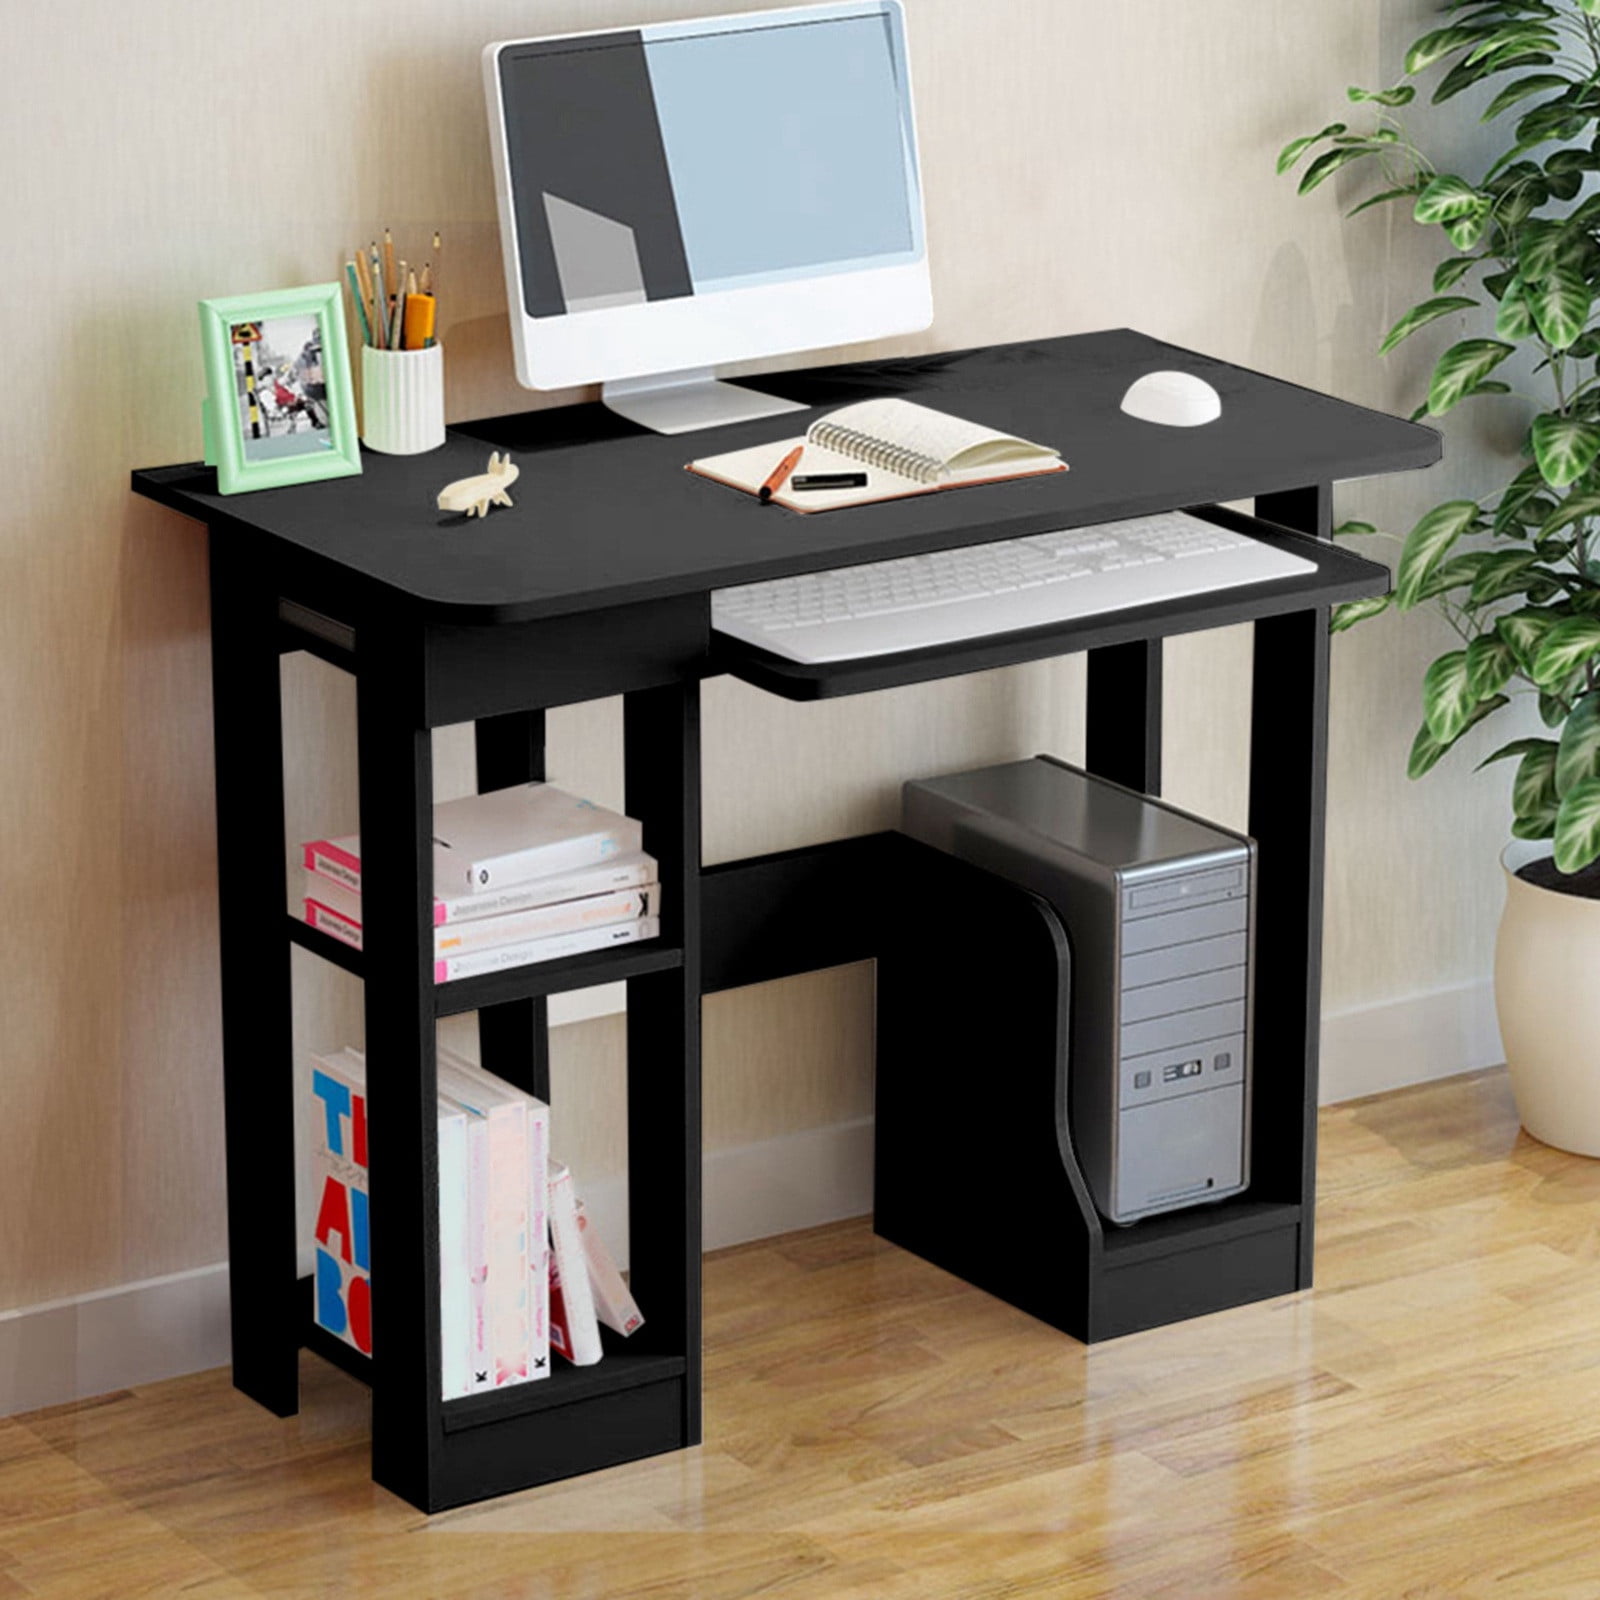 Details about   Can easily raise and lower the folding home desk computer desk TV tray Table 